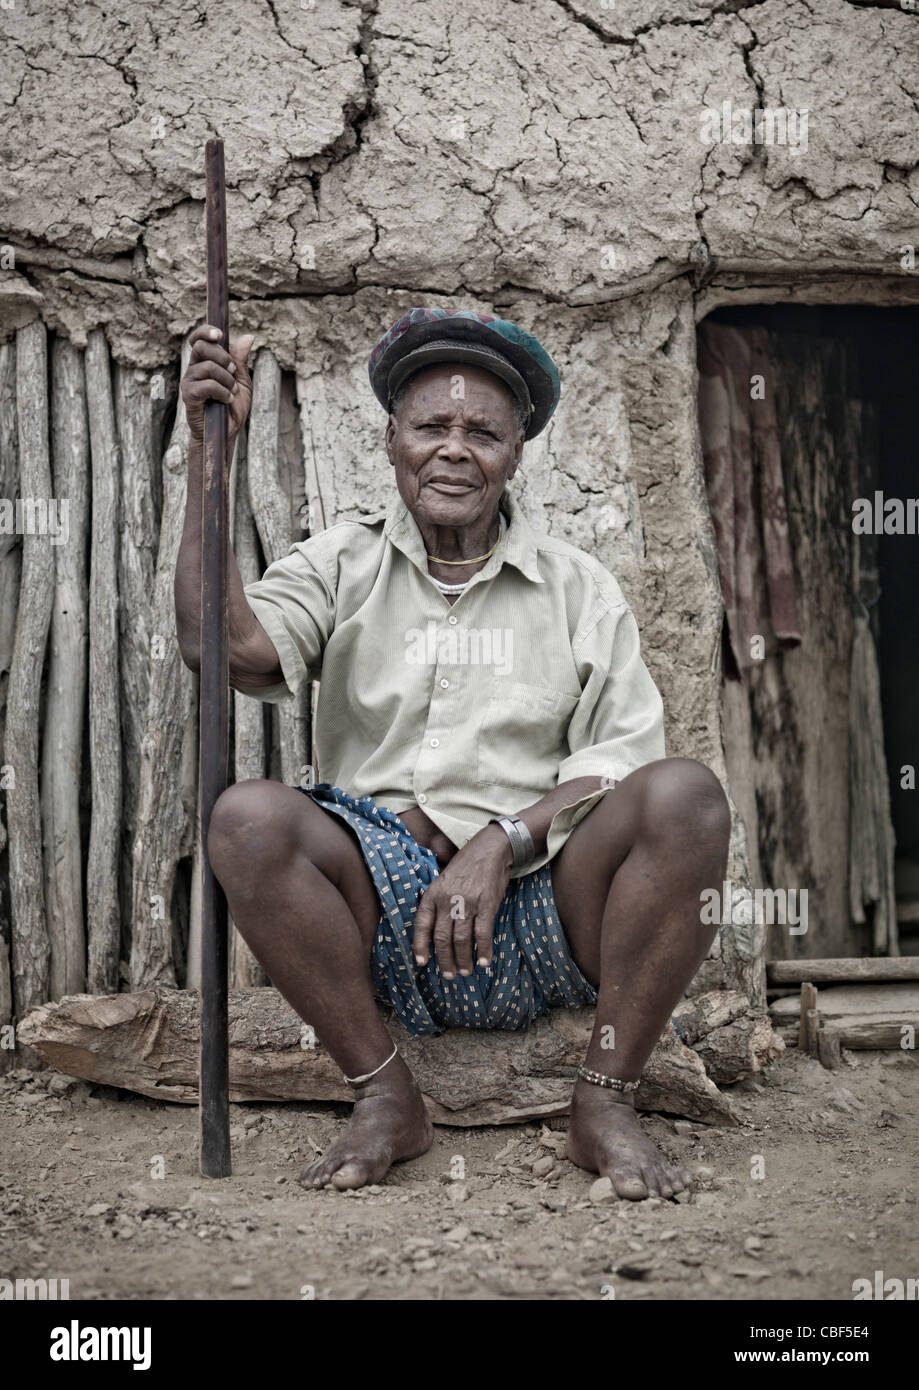 Old Mucubal Man Dressed In A Western Way, Virie Area, Angola Stock Photo